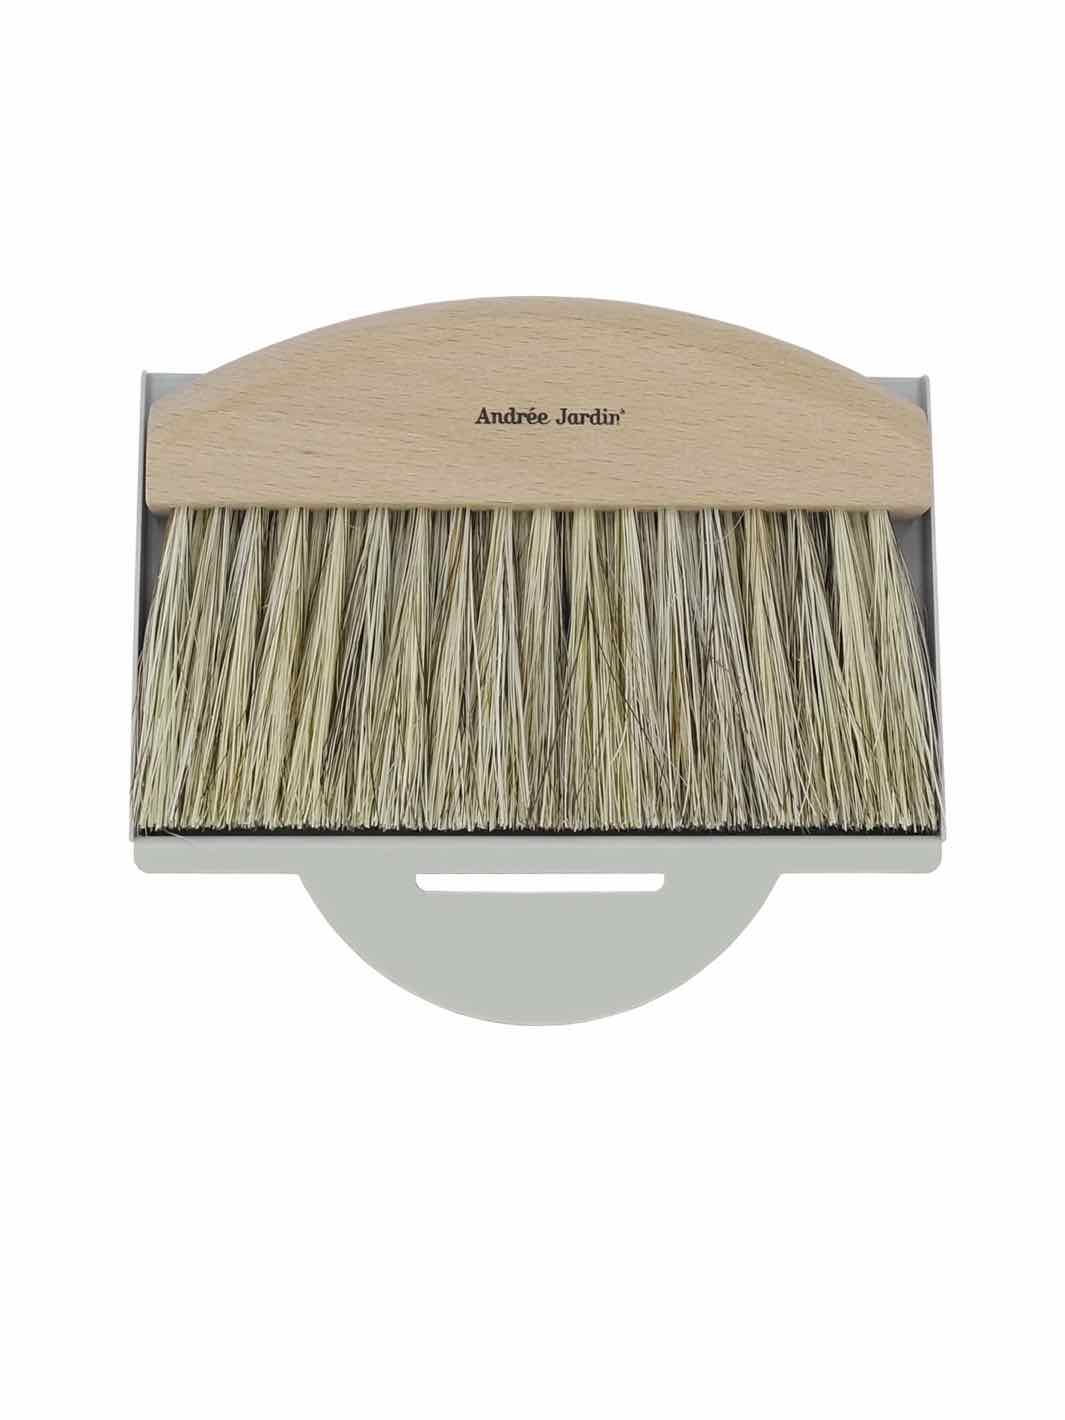 Andrée Jardin French Essential Dish Brush Set, Includes 5 Brushes on Food52